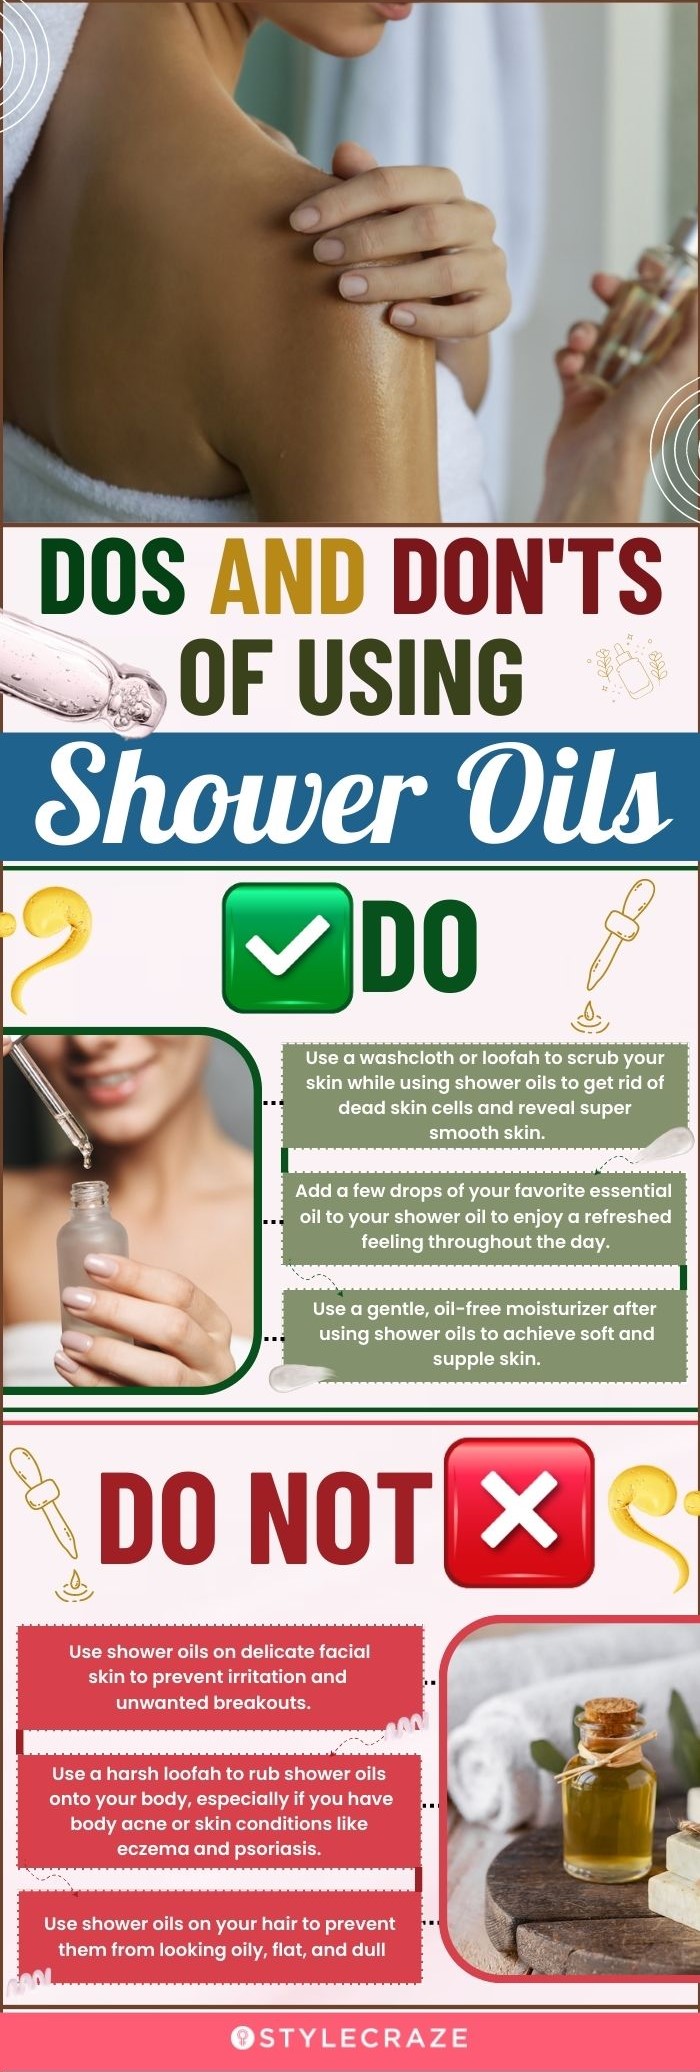 Dos And Don'ts Of Using Shower Oils (infographic)